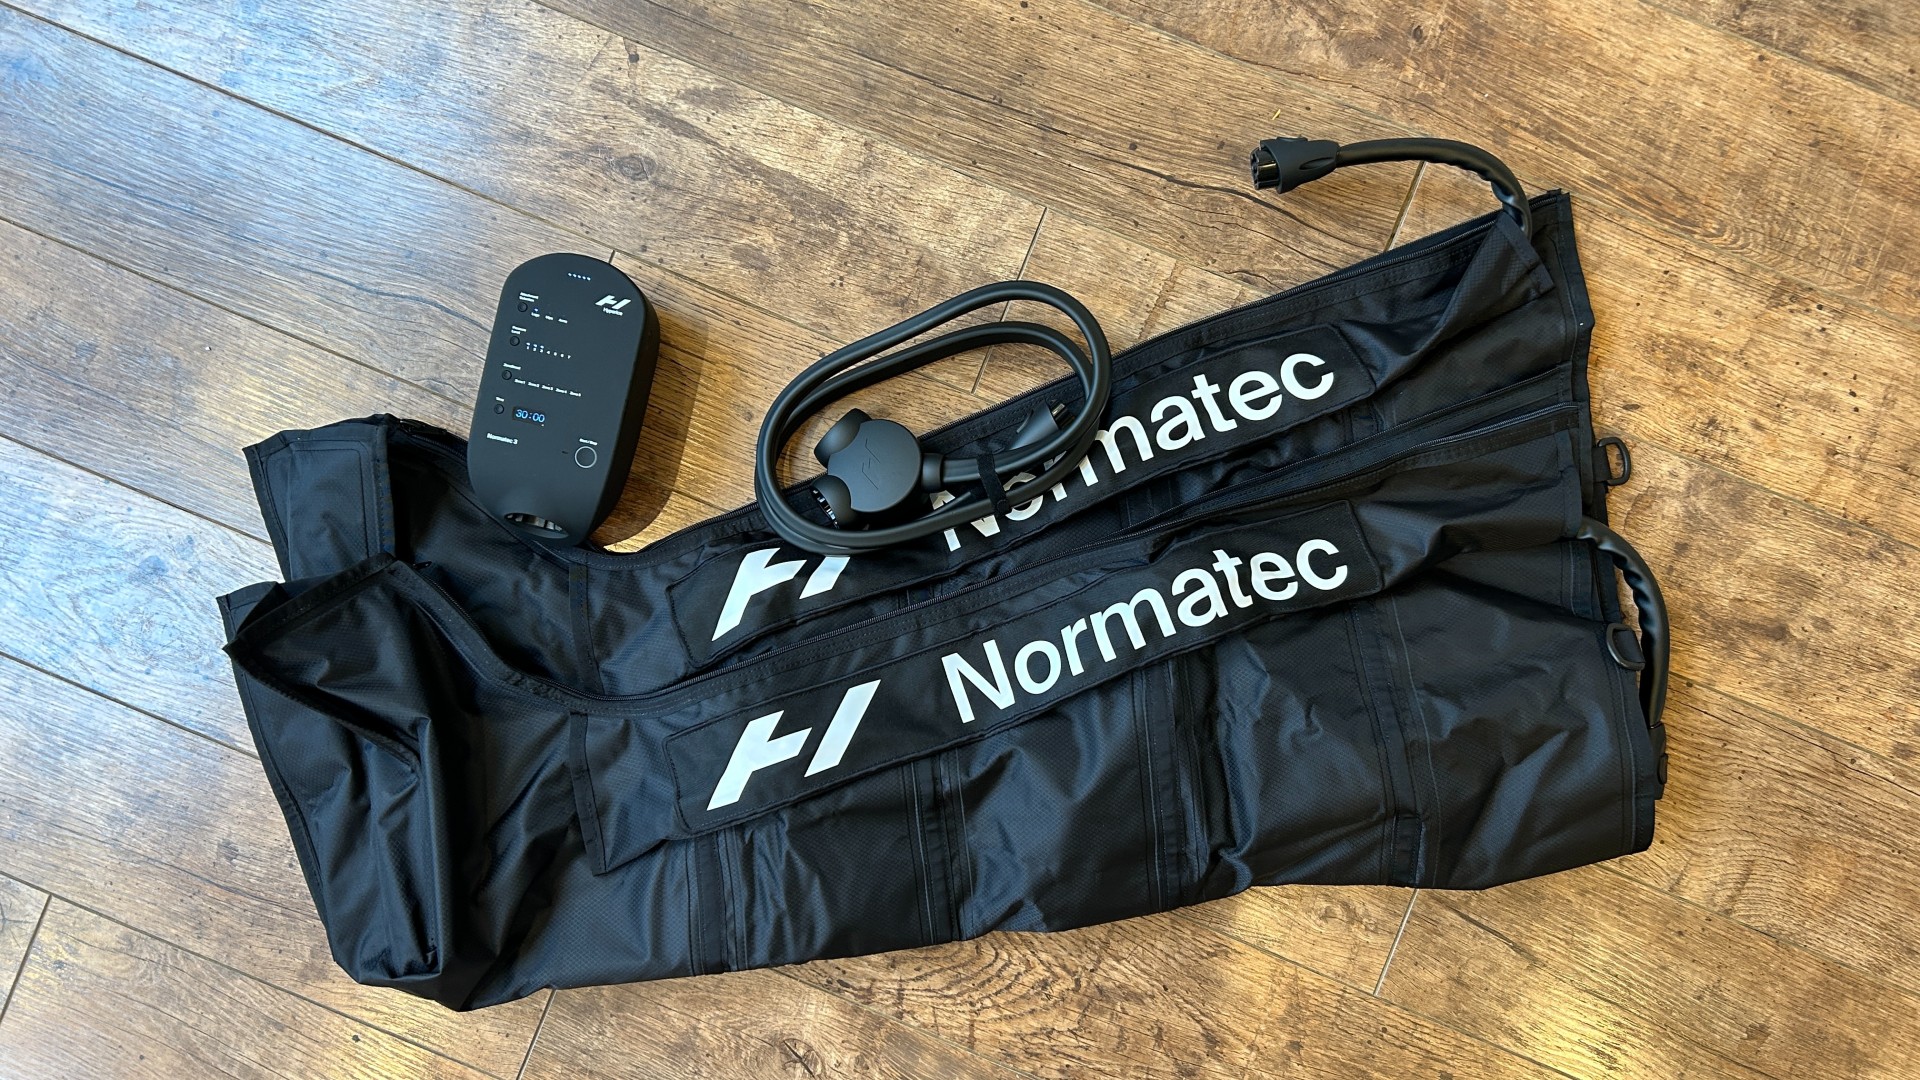 Hyperice Normatec 3 Legs Compression Boots Review